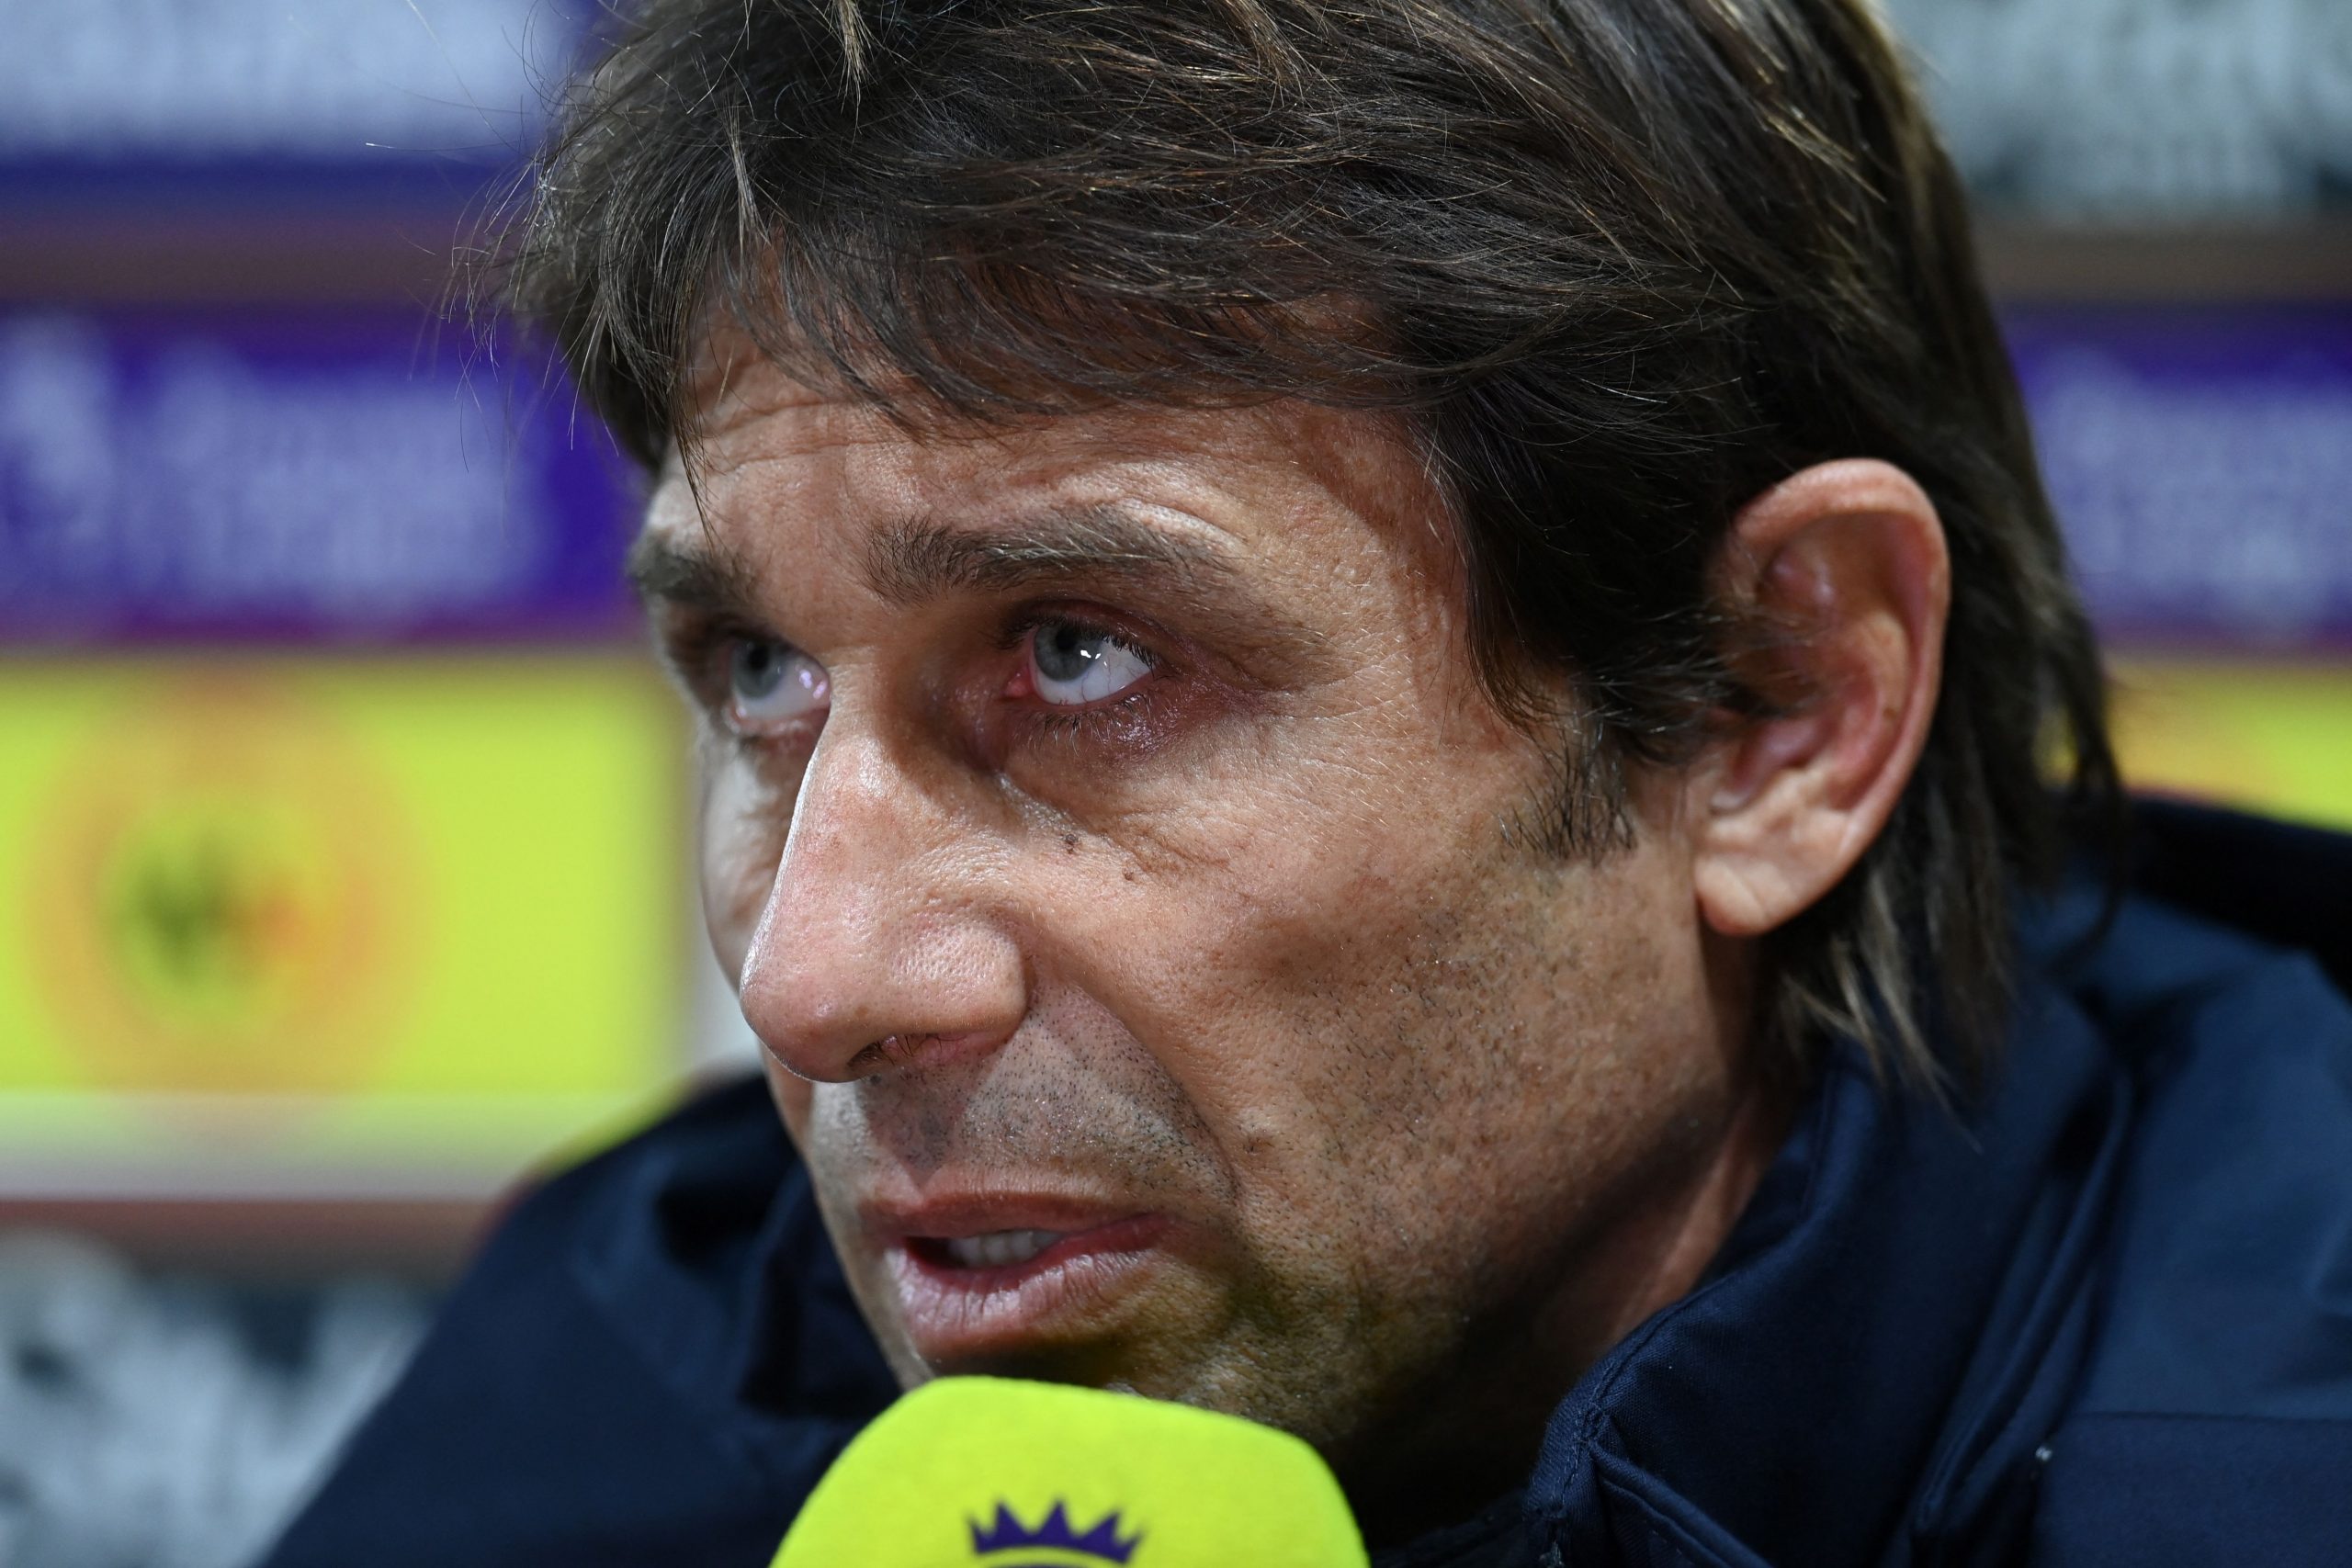 Antonio Conte will experience North London derby for the first time later today.